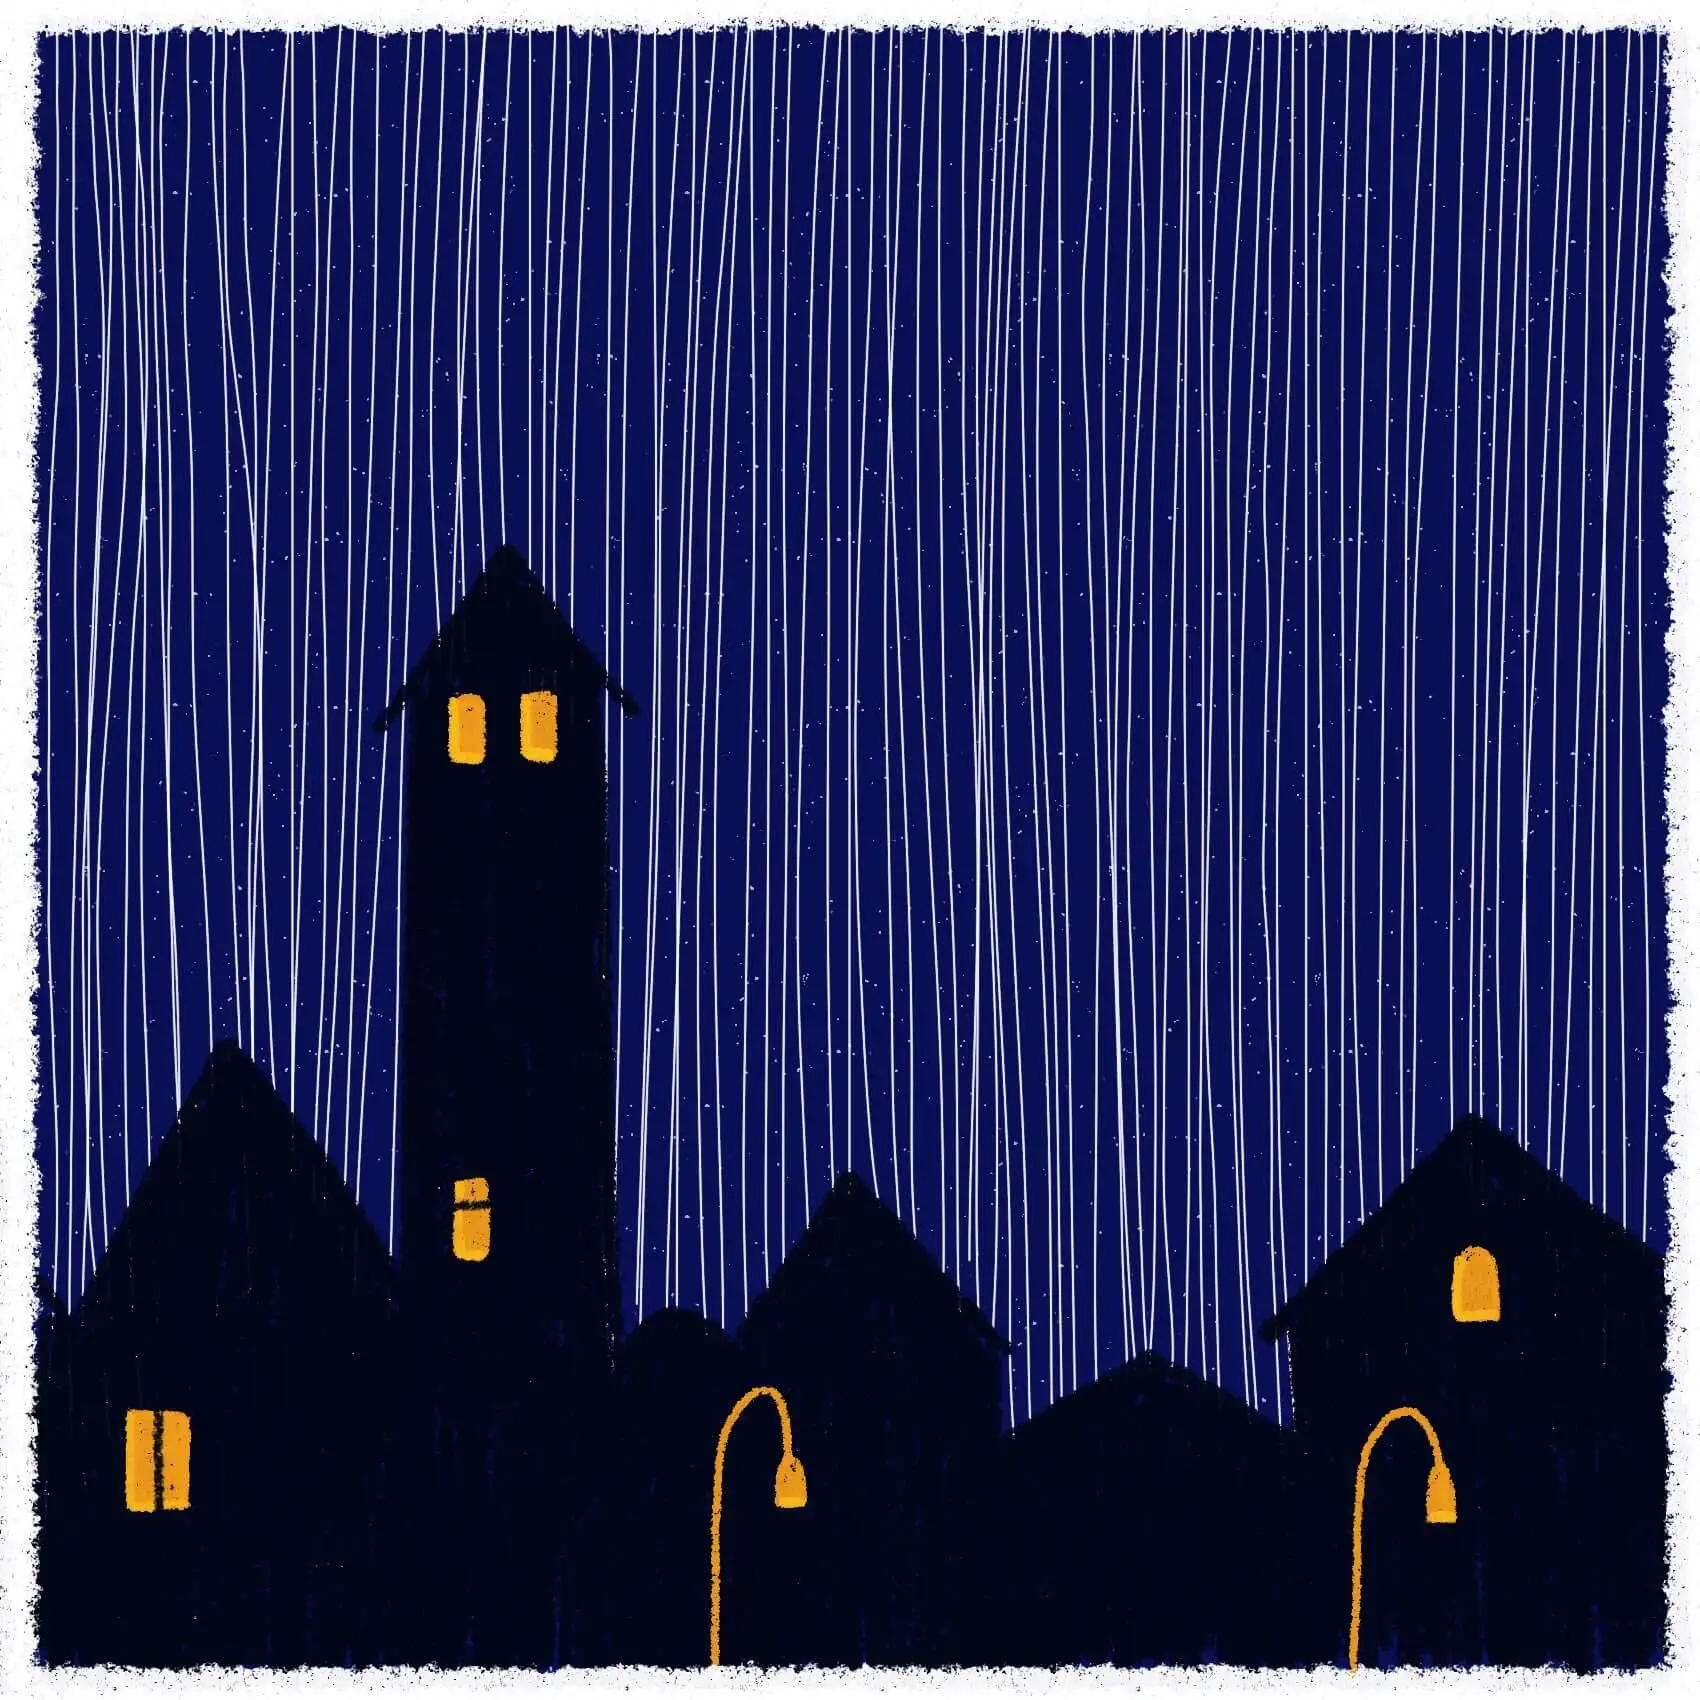 Drawing of a village on a rainy night